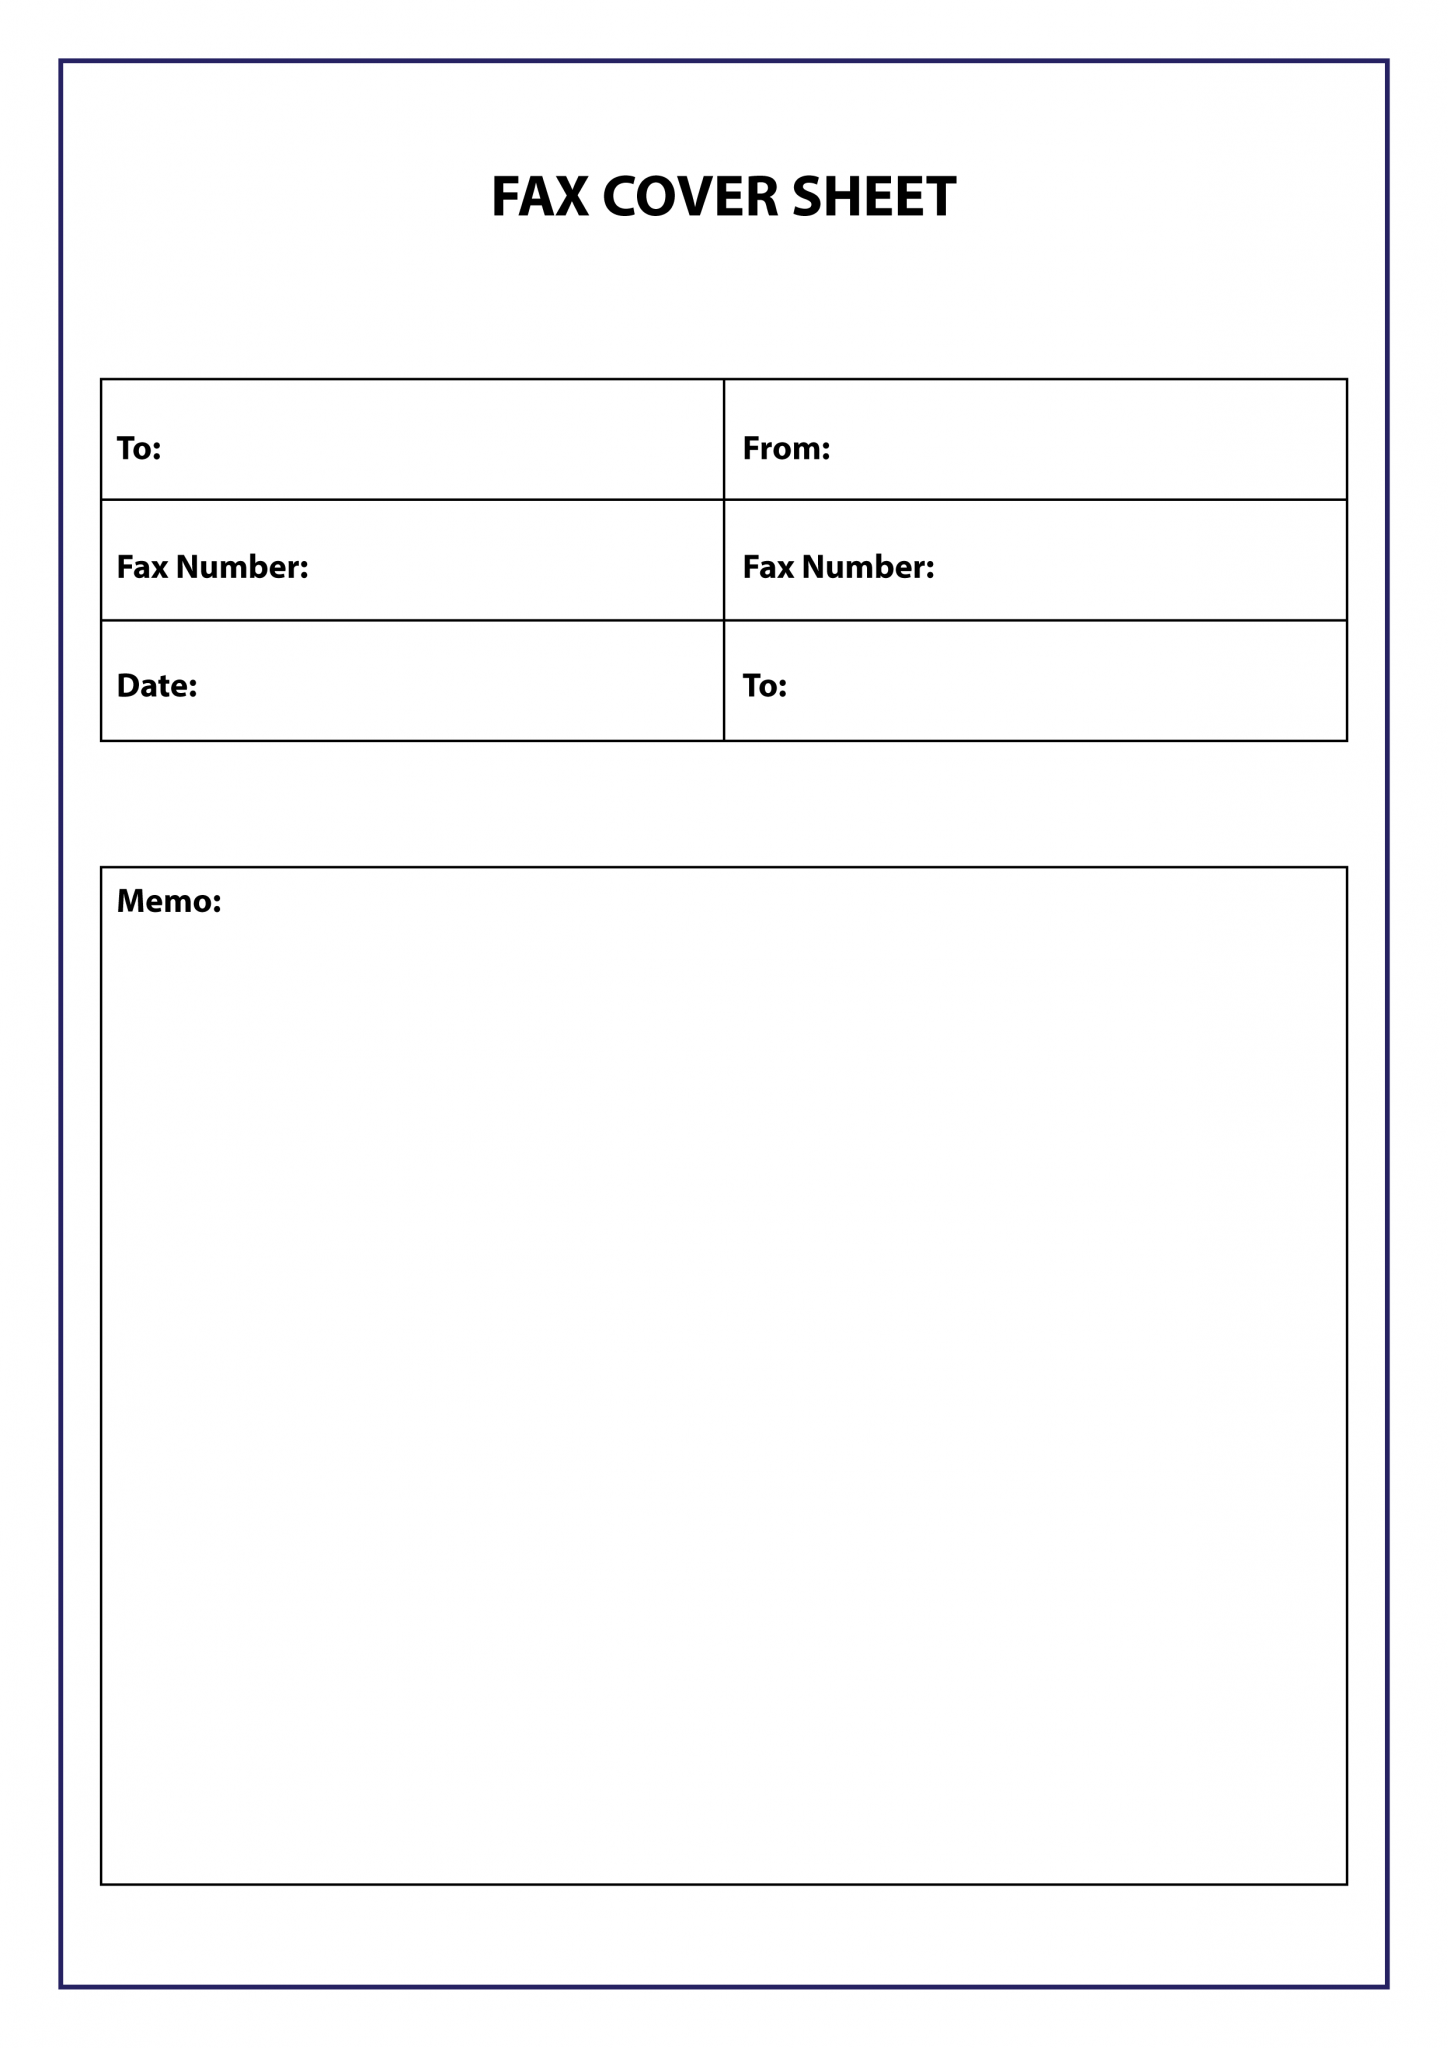 free basic fax cover sheet template pdf word